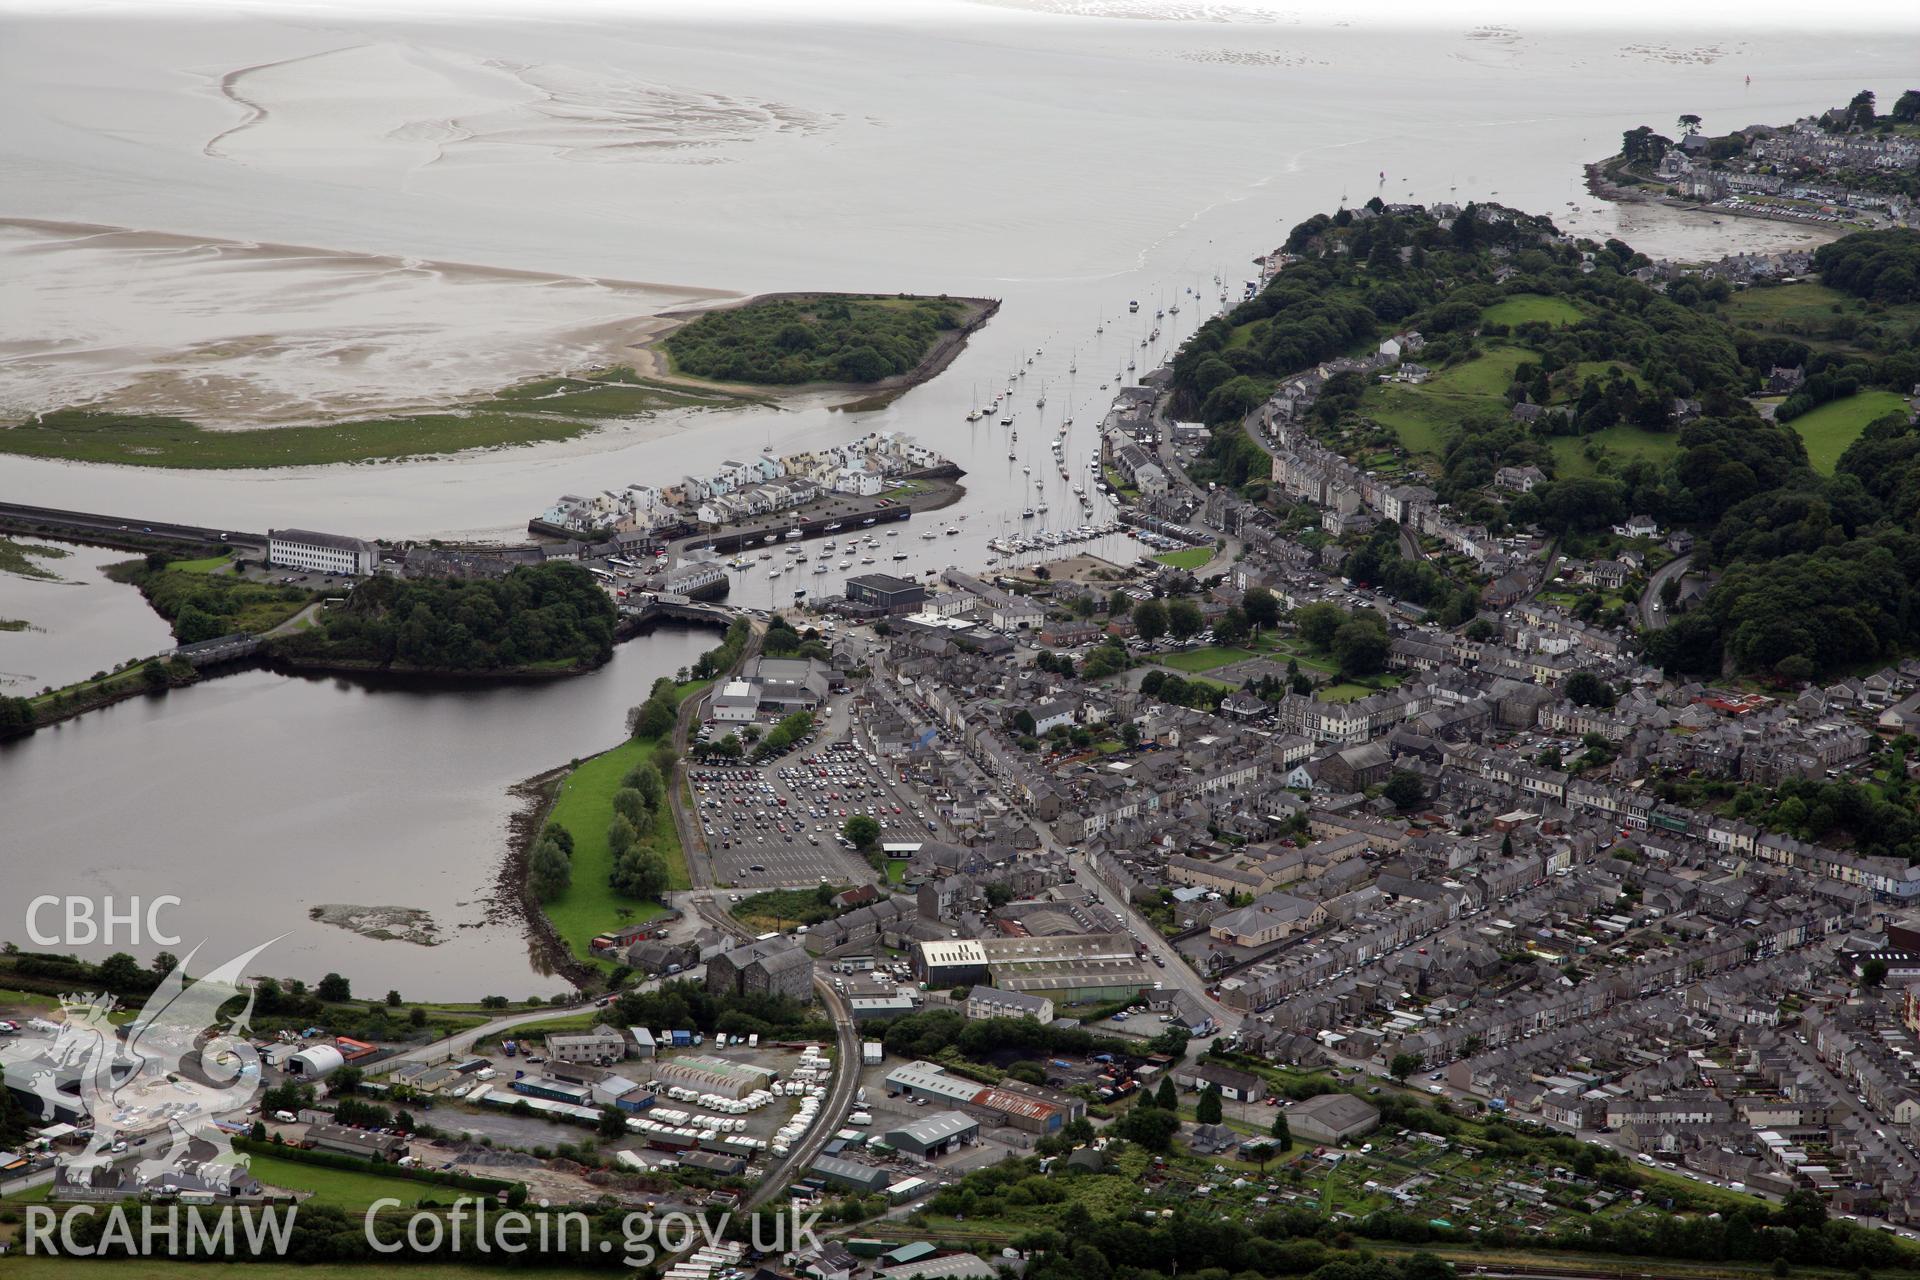 RCAHMW colour oblique photograph of Porthmadog. Taken by Toby Driver on 17/08/2011.